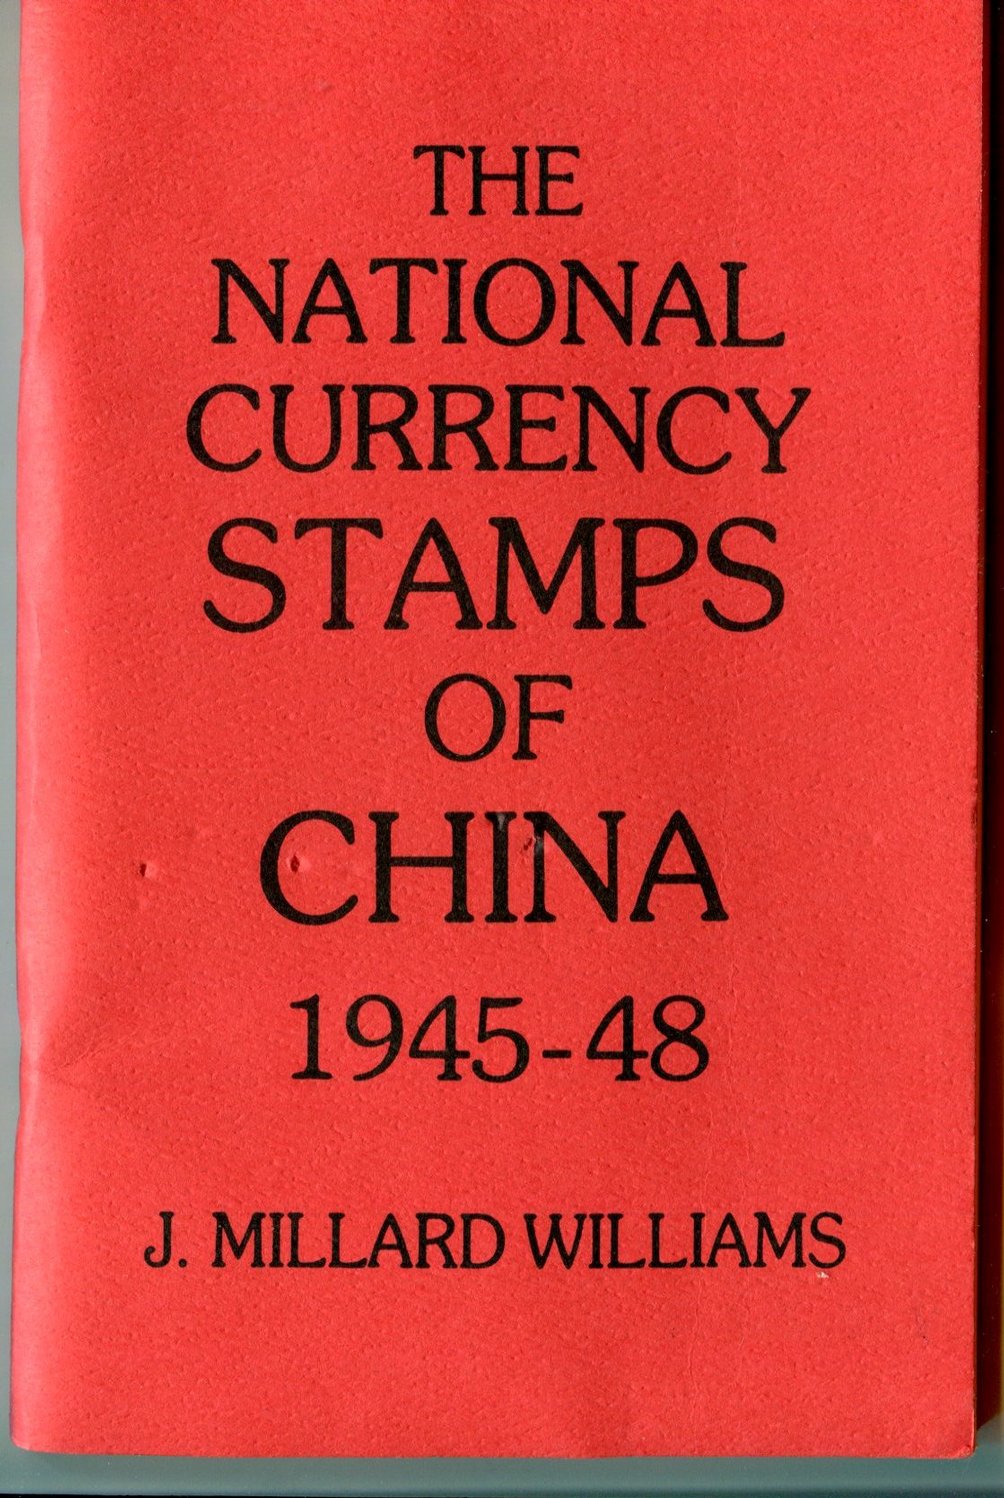 J. Millard Williams, The National Currency Stamps of China 1945, 100 pages, 1981, new condition, paperback (6 oz.)